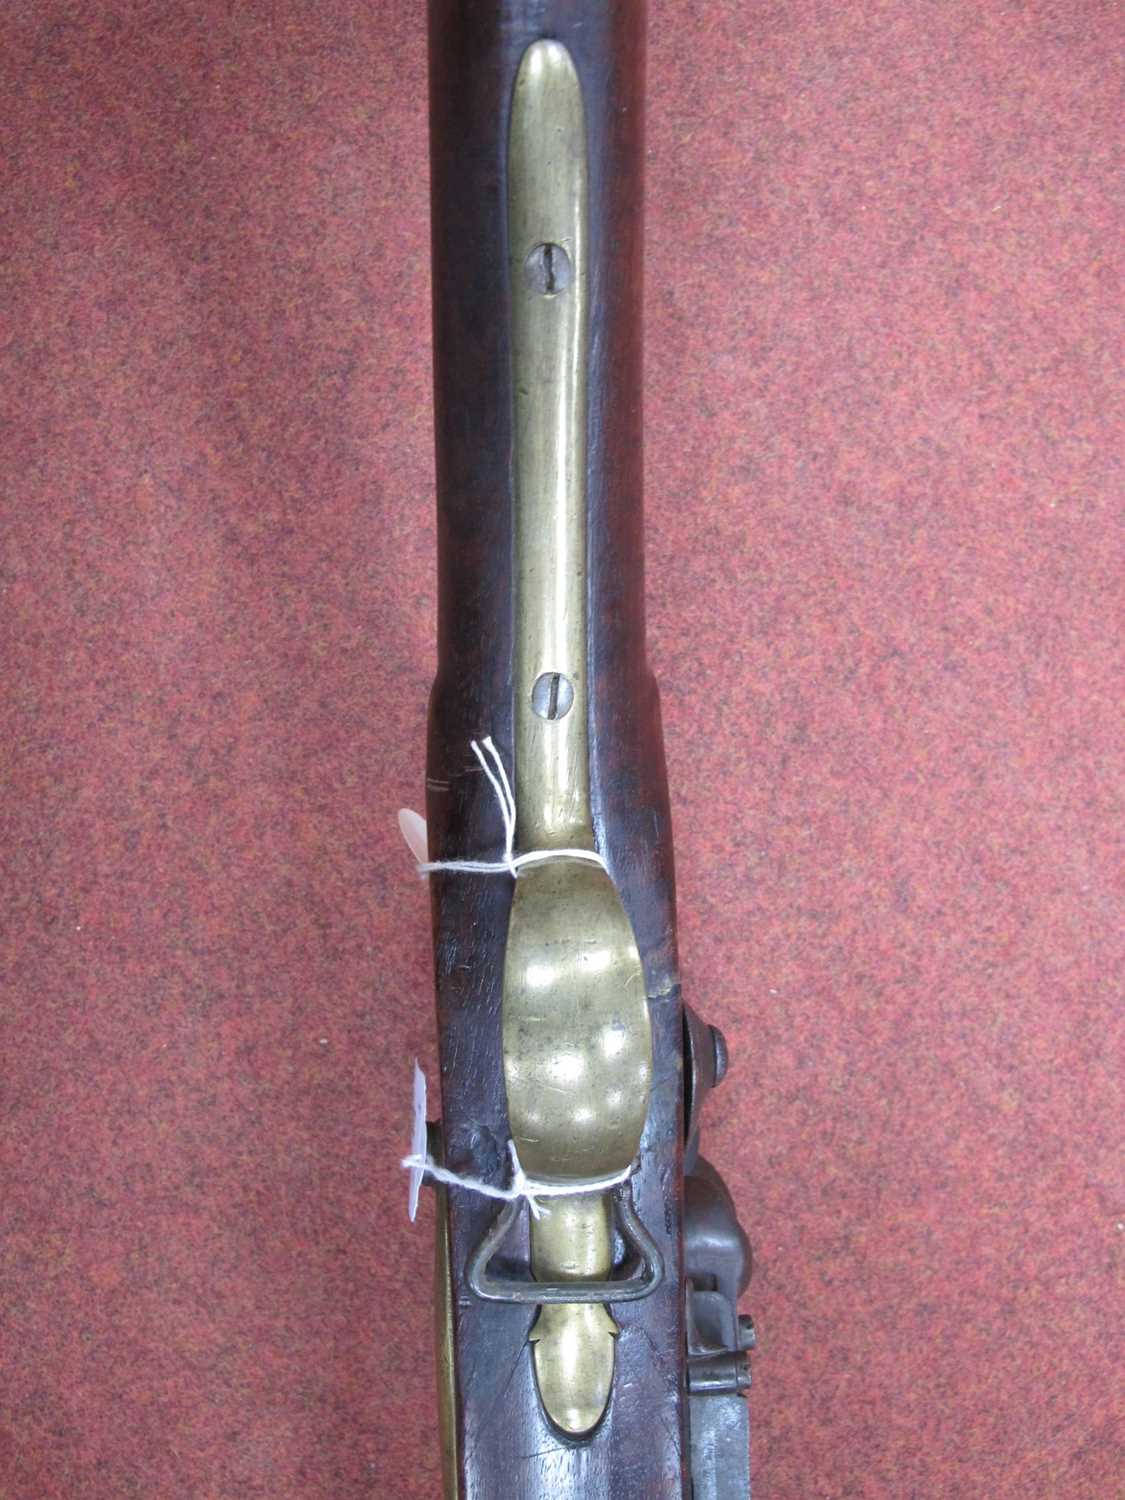 British India Pattern Circa 1810 'Brown Bess' Flintlock Musket, marked 'Tower' with 'GR' crown - Image 6 of 17